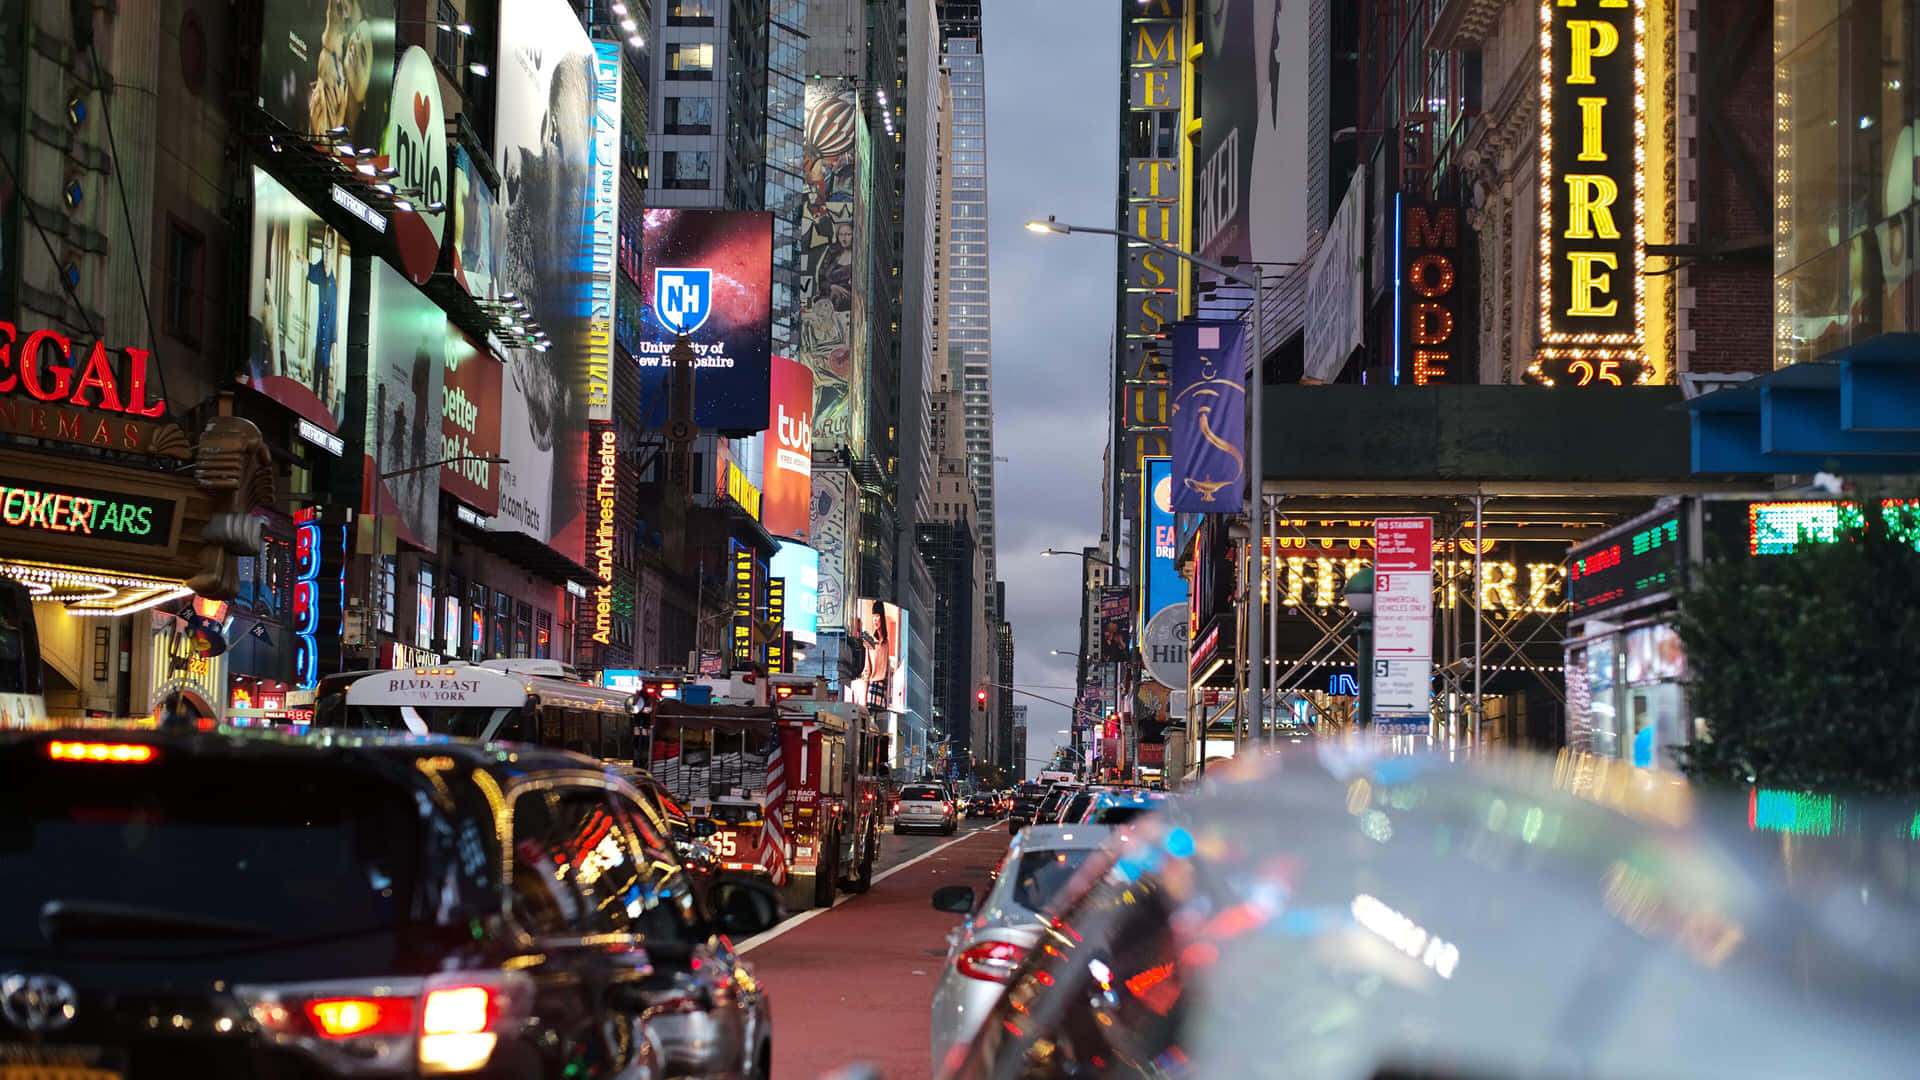 Bright lights and endless energy in the heart of New York City - Times Square Wallpaper